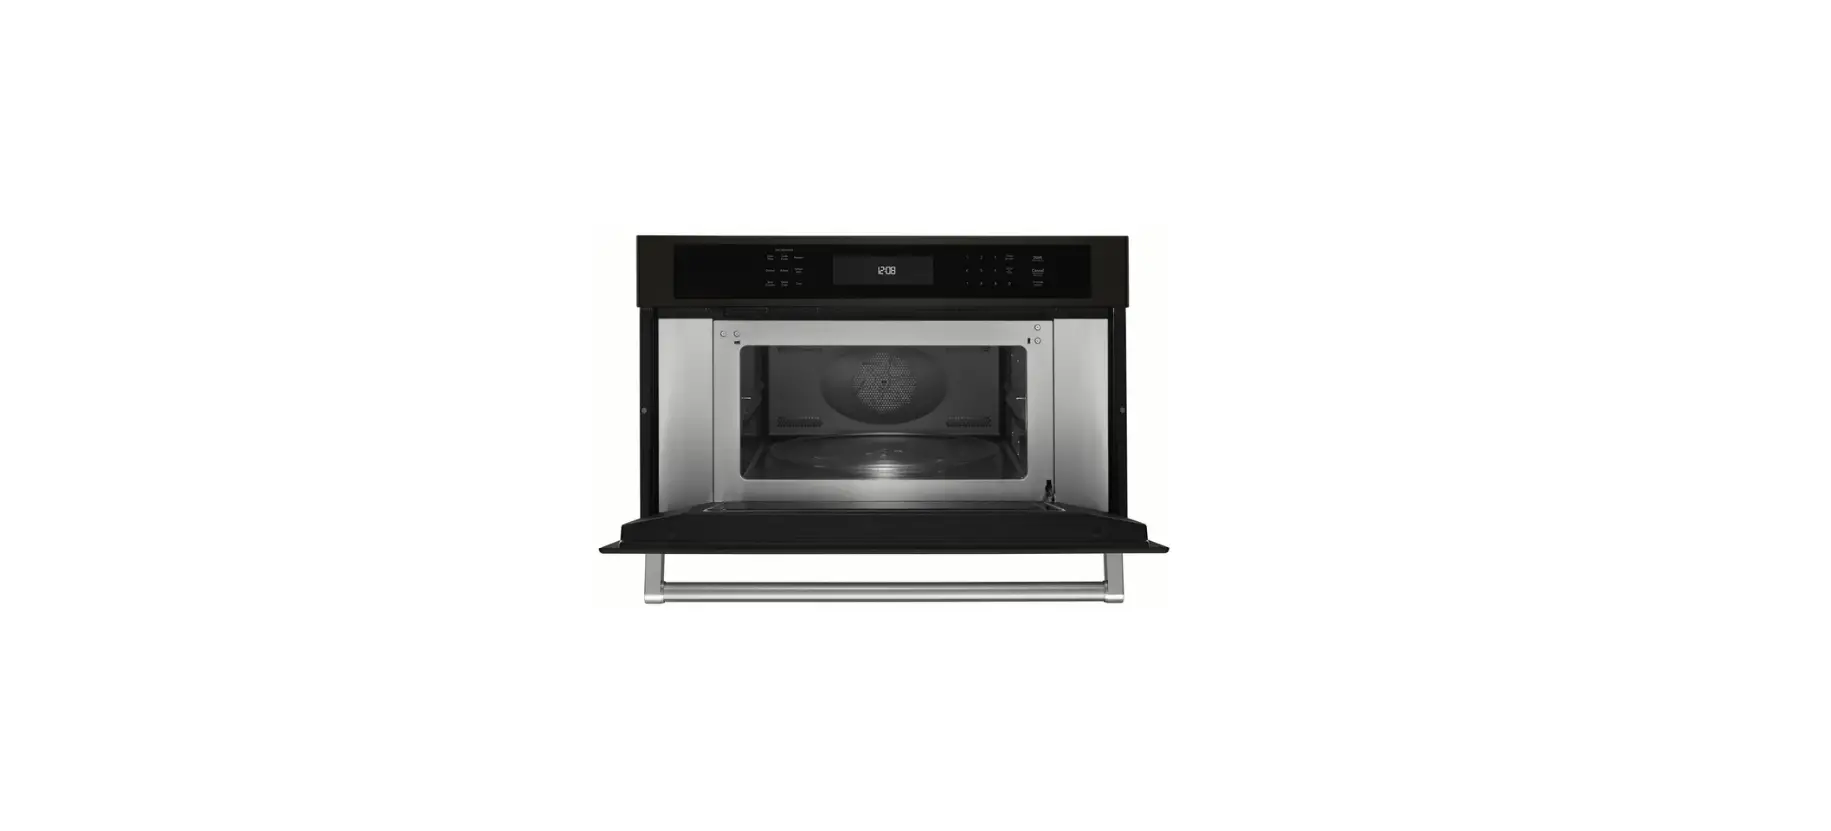 Built-In Convection Microwave Oven W10643473B